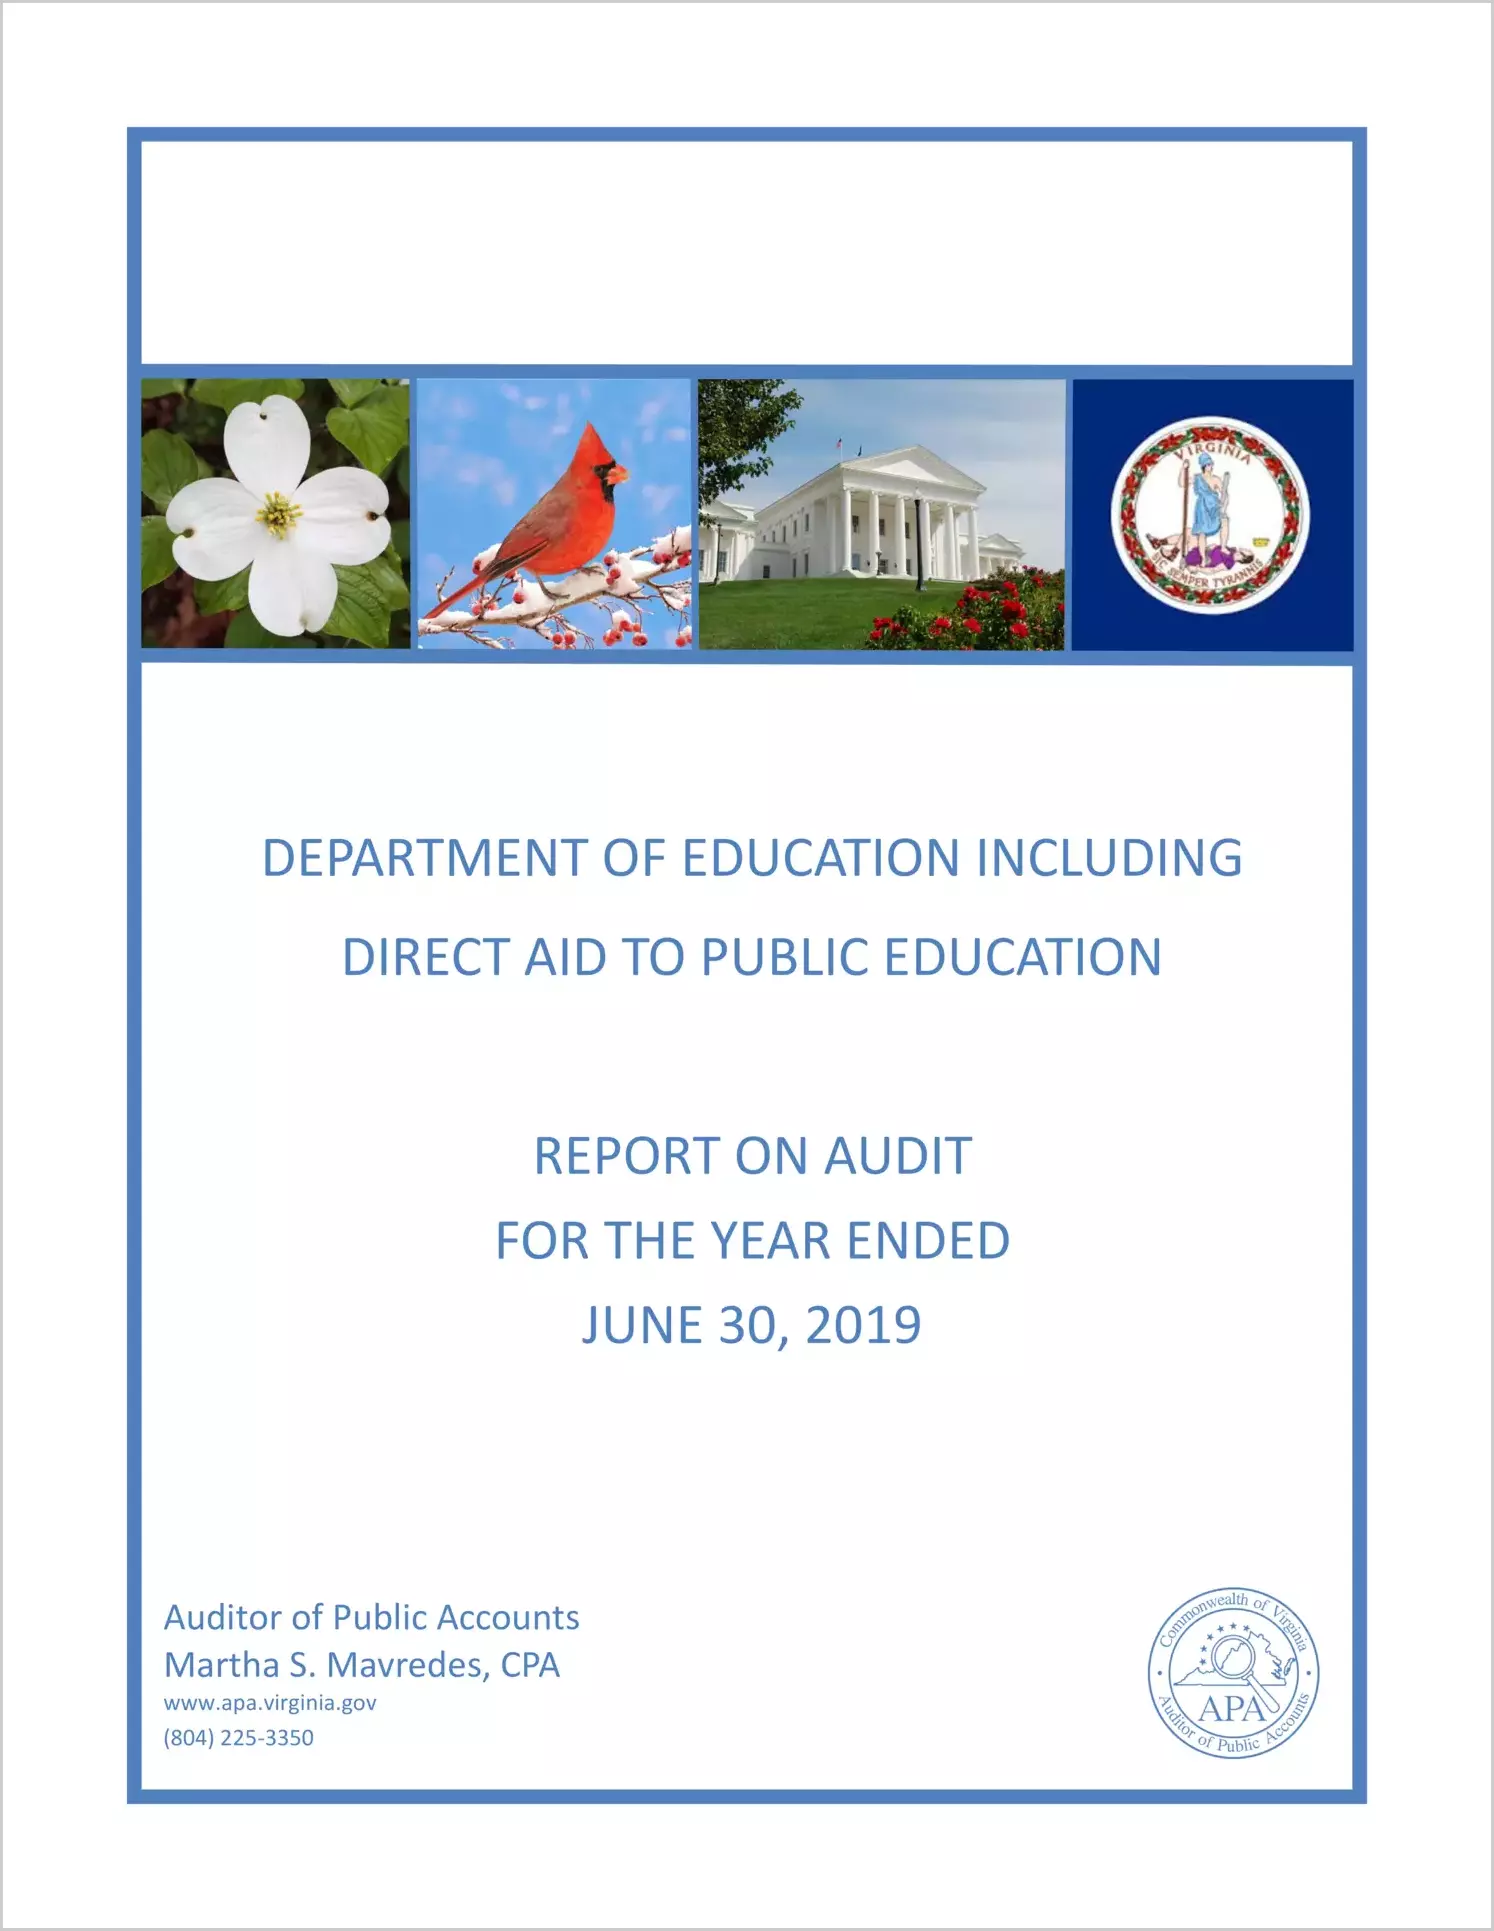 Department of Education Including Direct Aid to Public Education for the year ended June 30, 2019